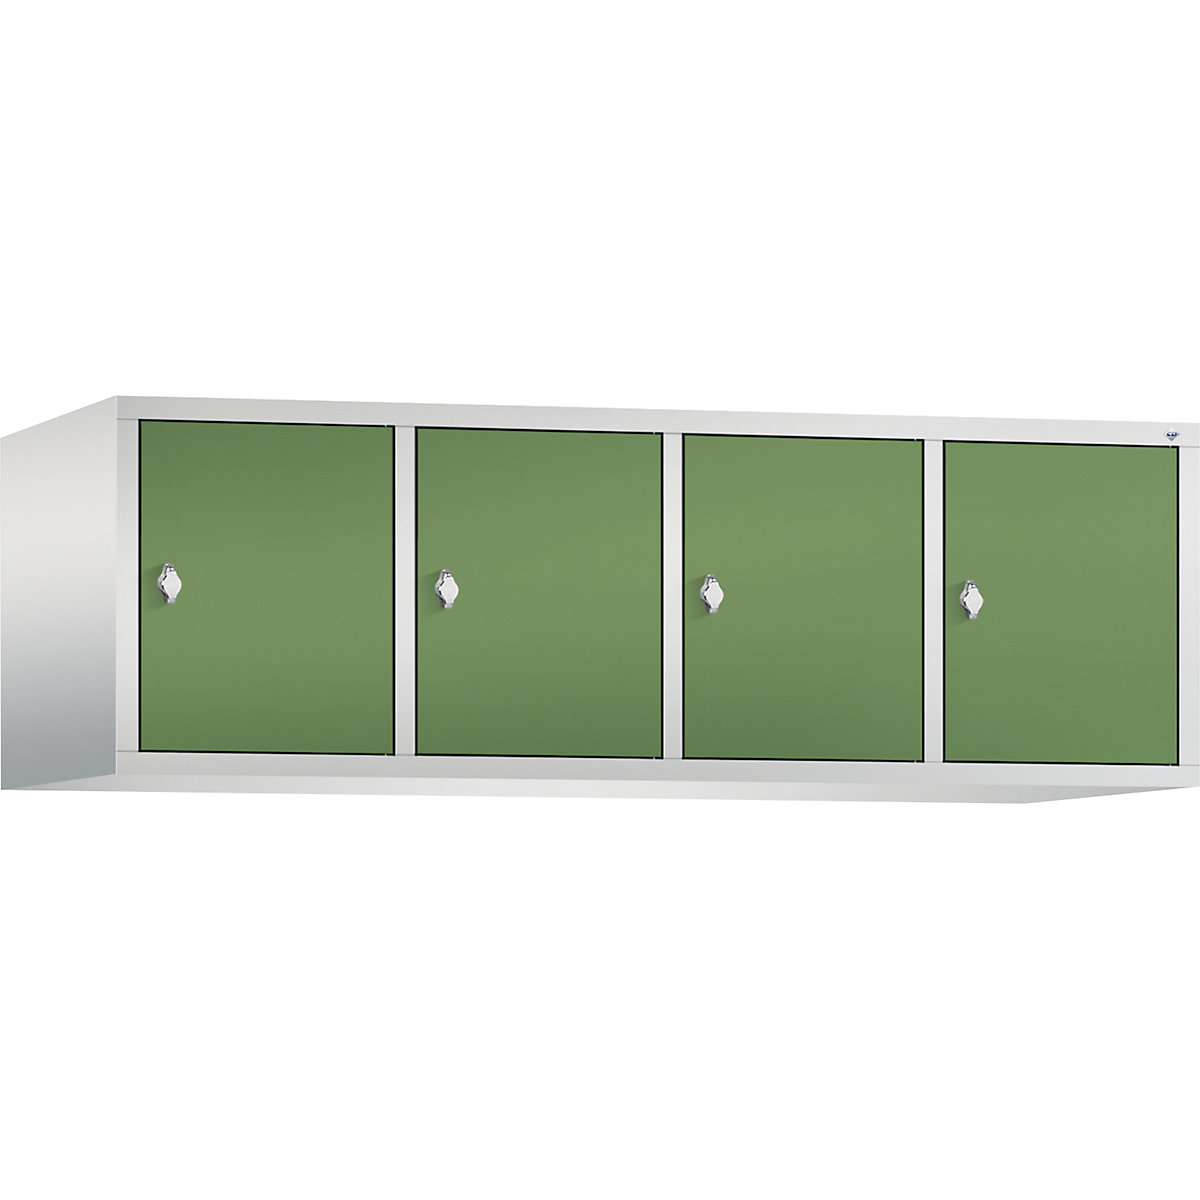 CLASSIC add-on cupboard – C+P, 4 compartments, compartment width 400 mm, light grey / reseda green-8